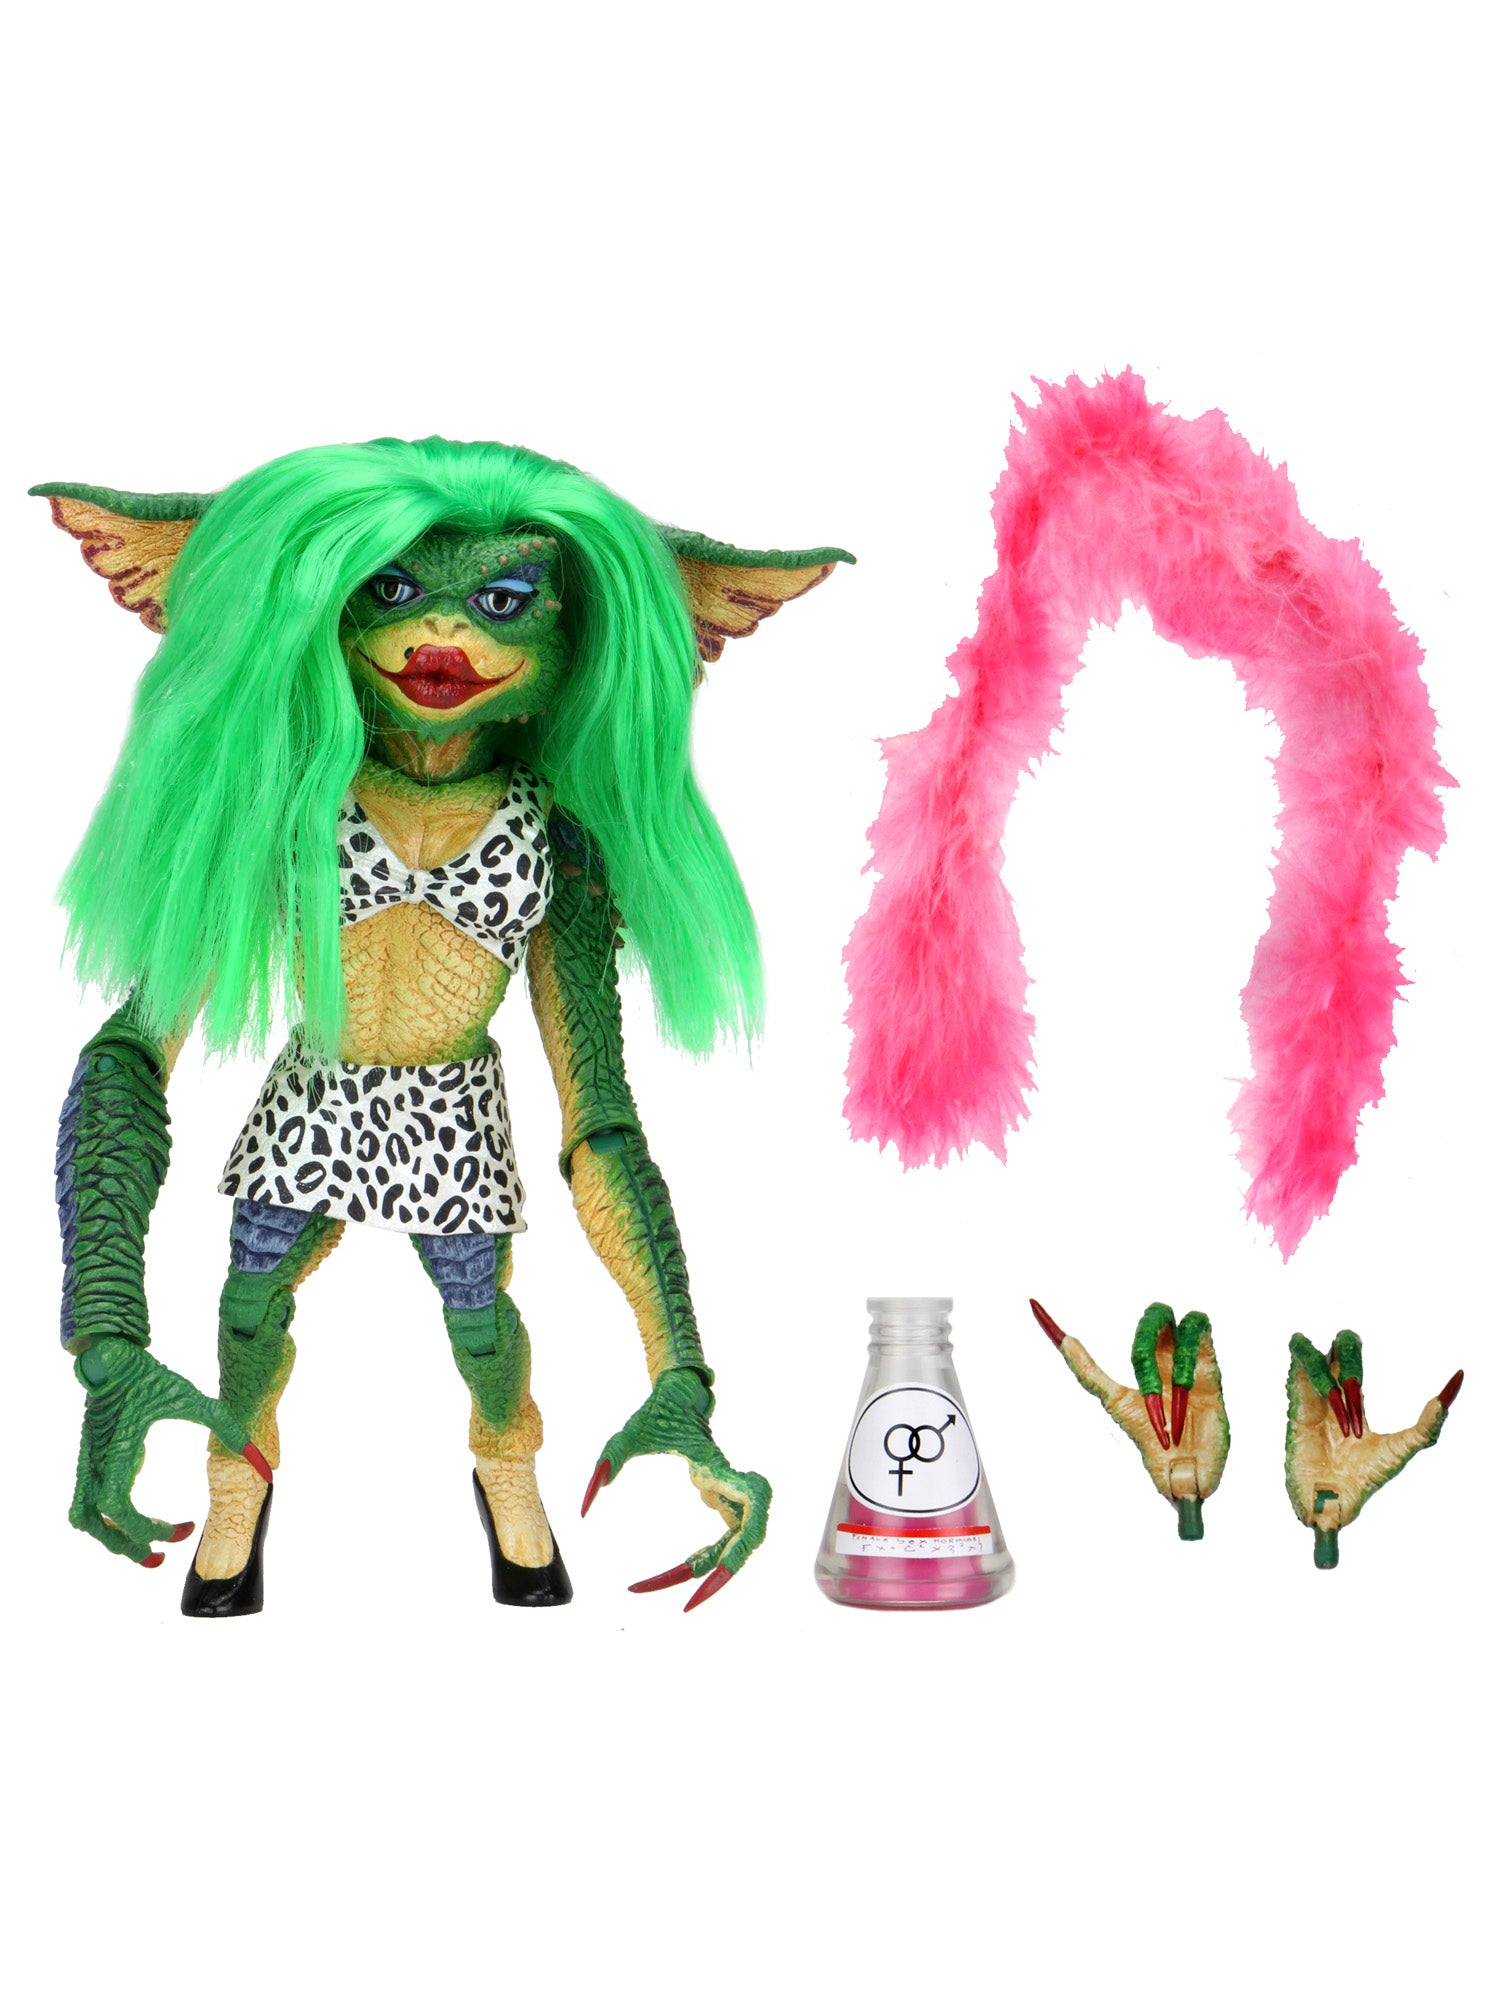 NECA - Gremlins 2 - The New Batch - 7" Scale Action Figure - Ultimate Greta - costumes.com